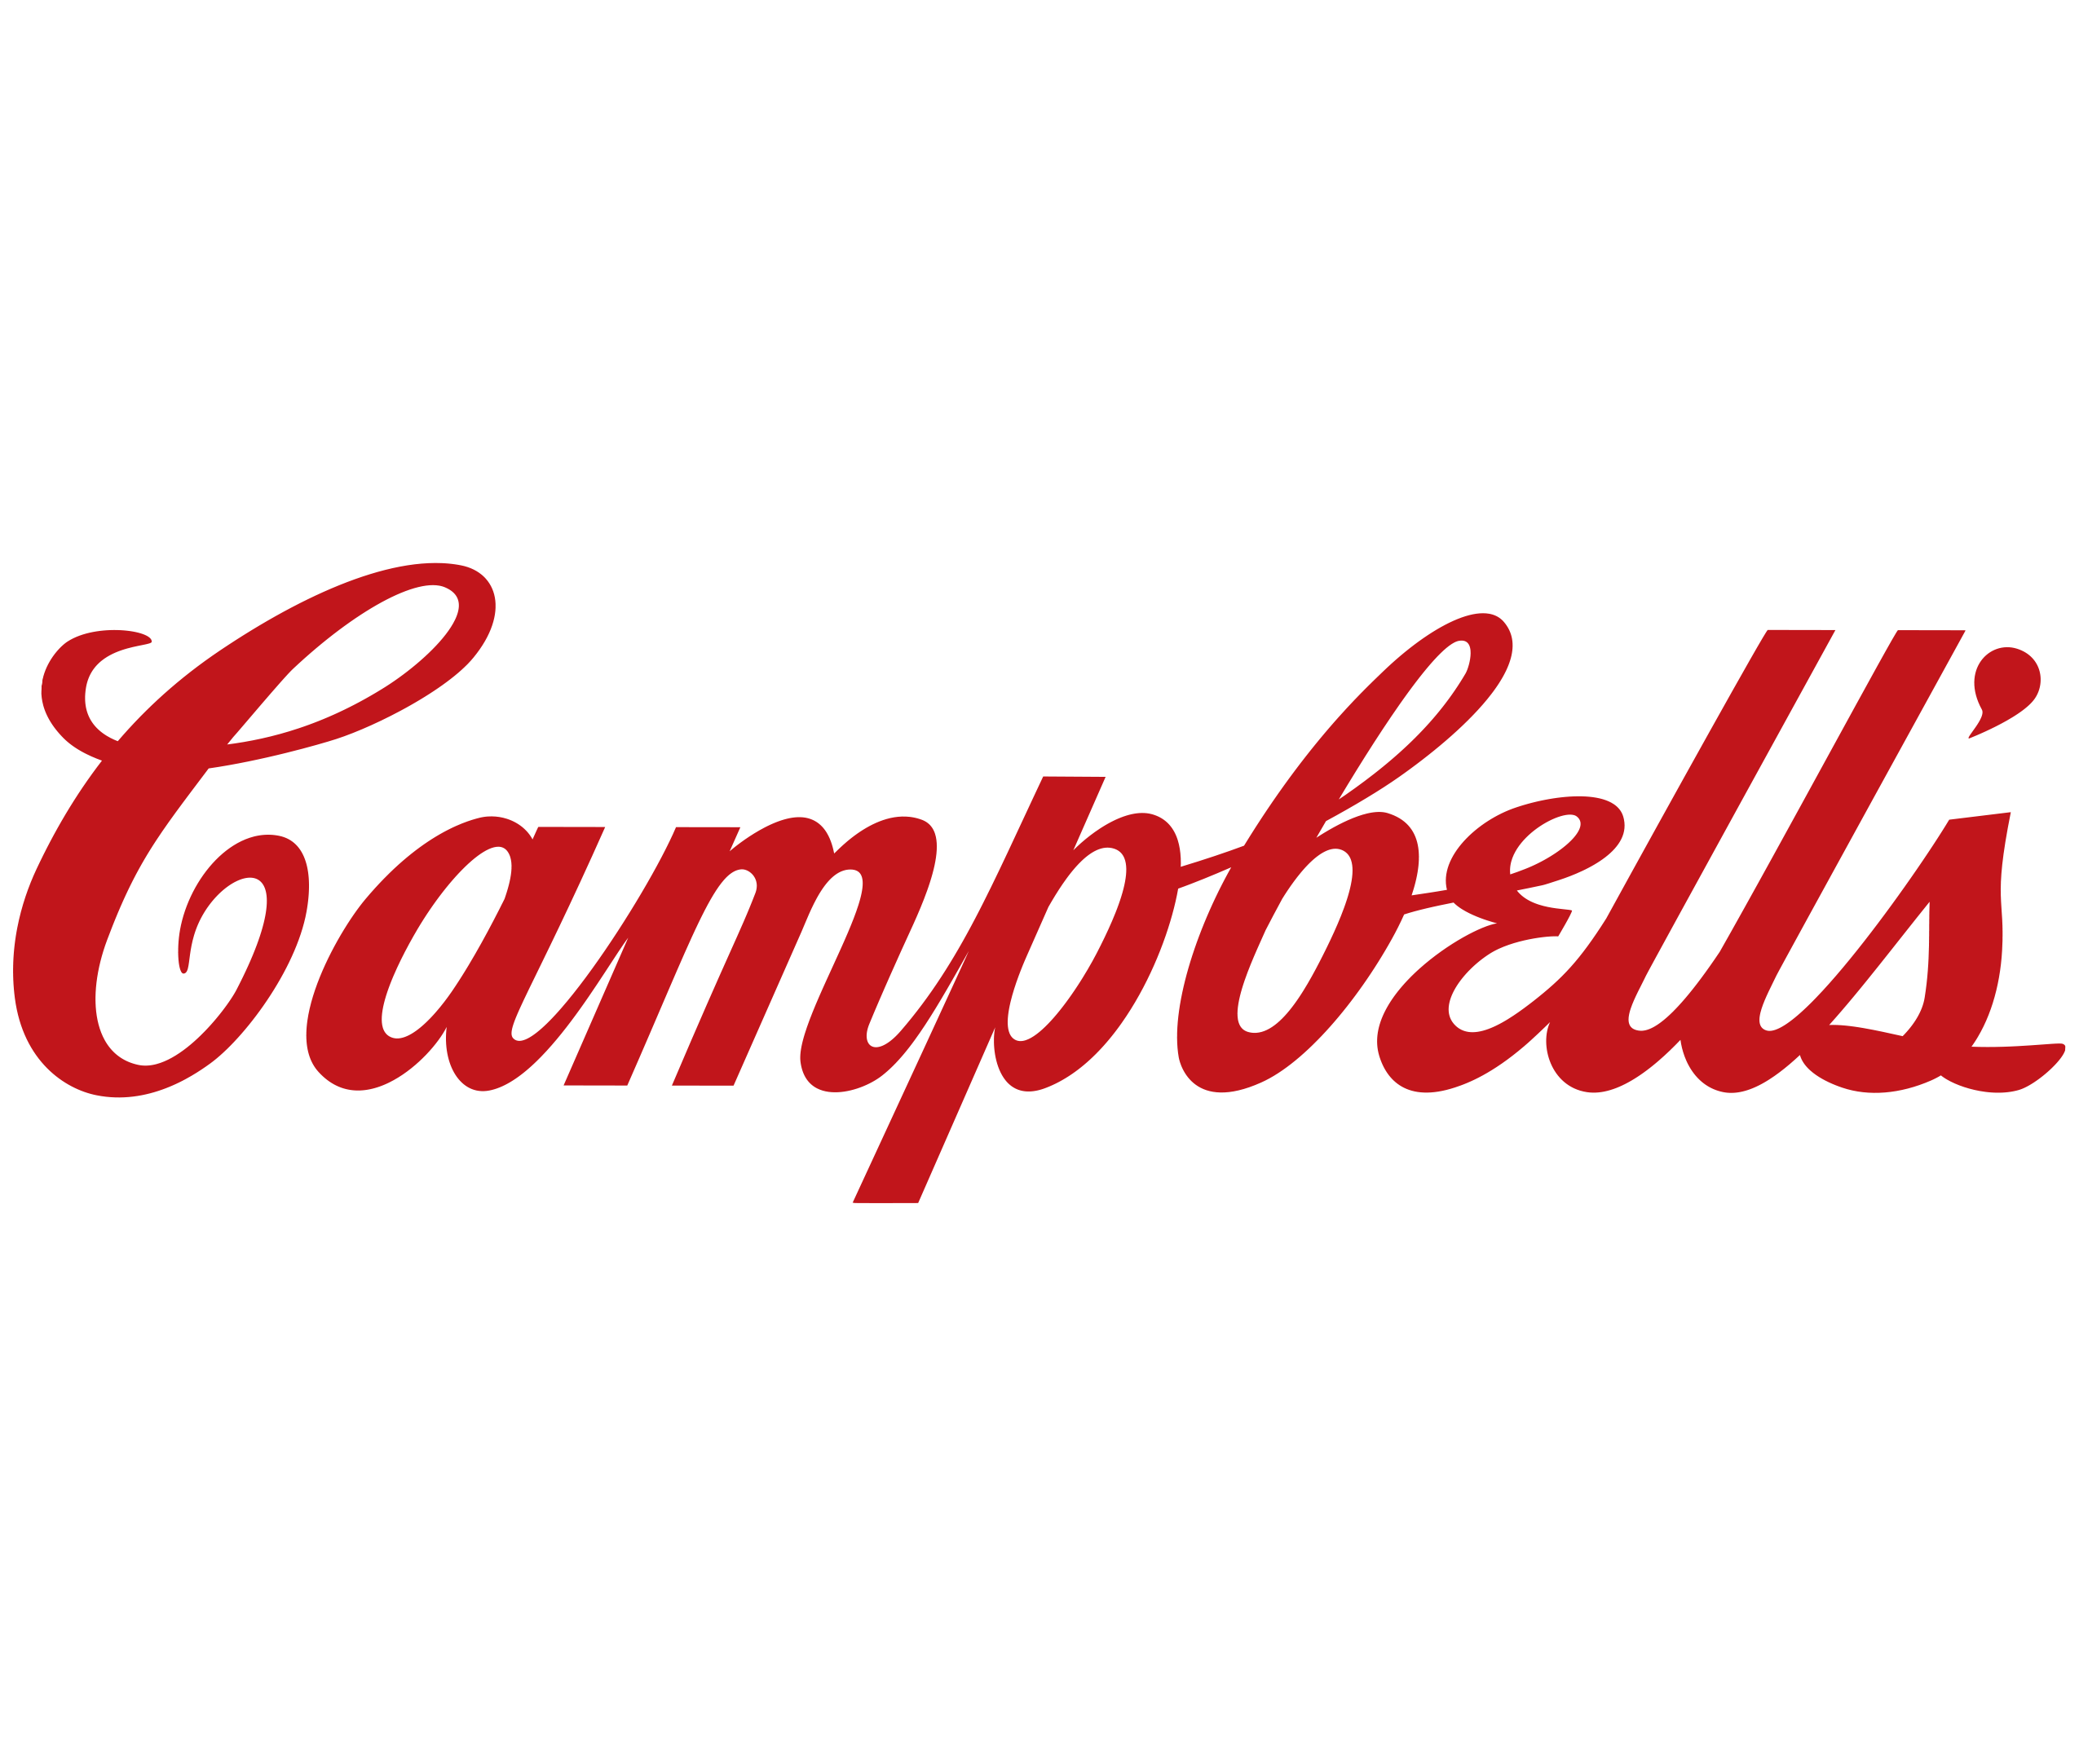 Customer Experience quote from Campbell's Soup company